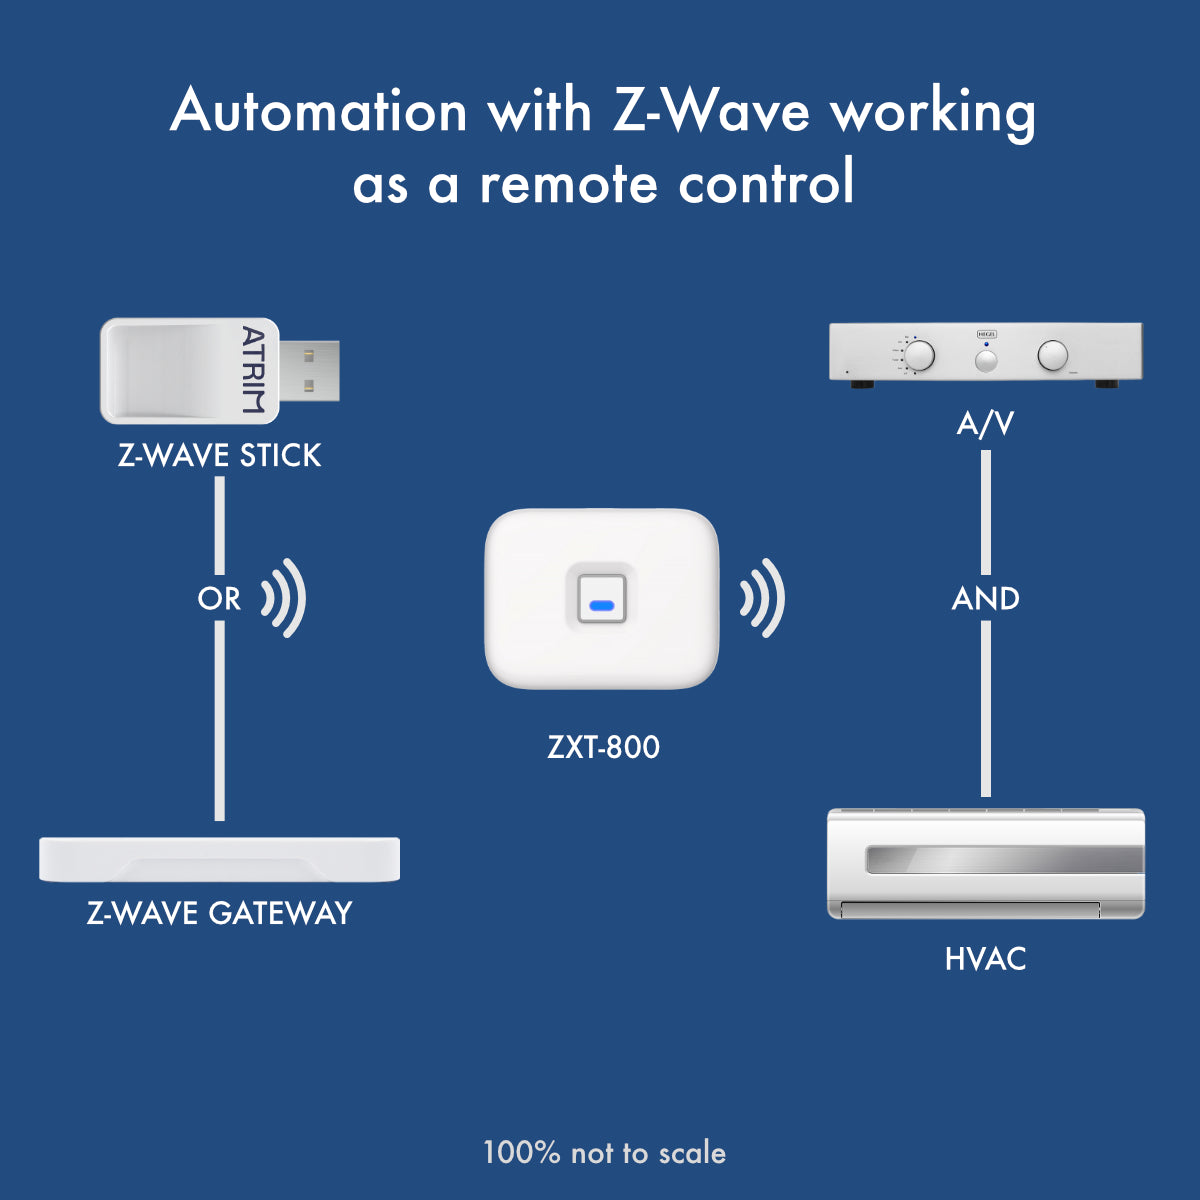 ZXT works as a Z-Wave to AV or HVAC remote controller